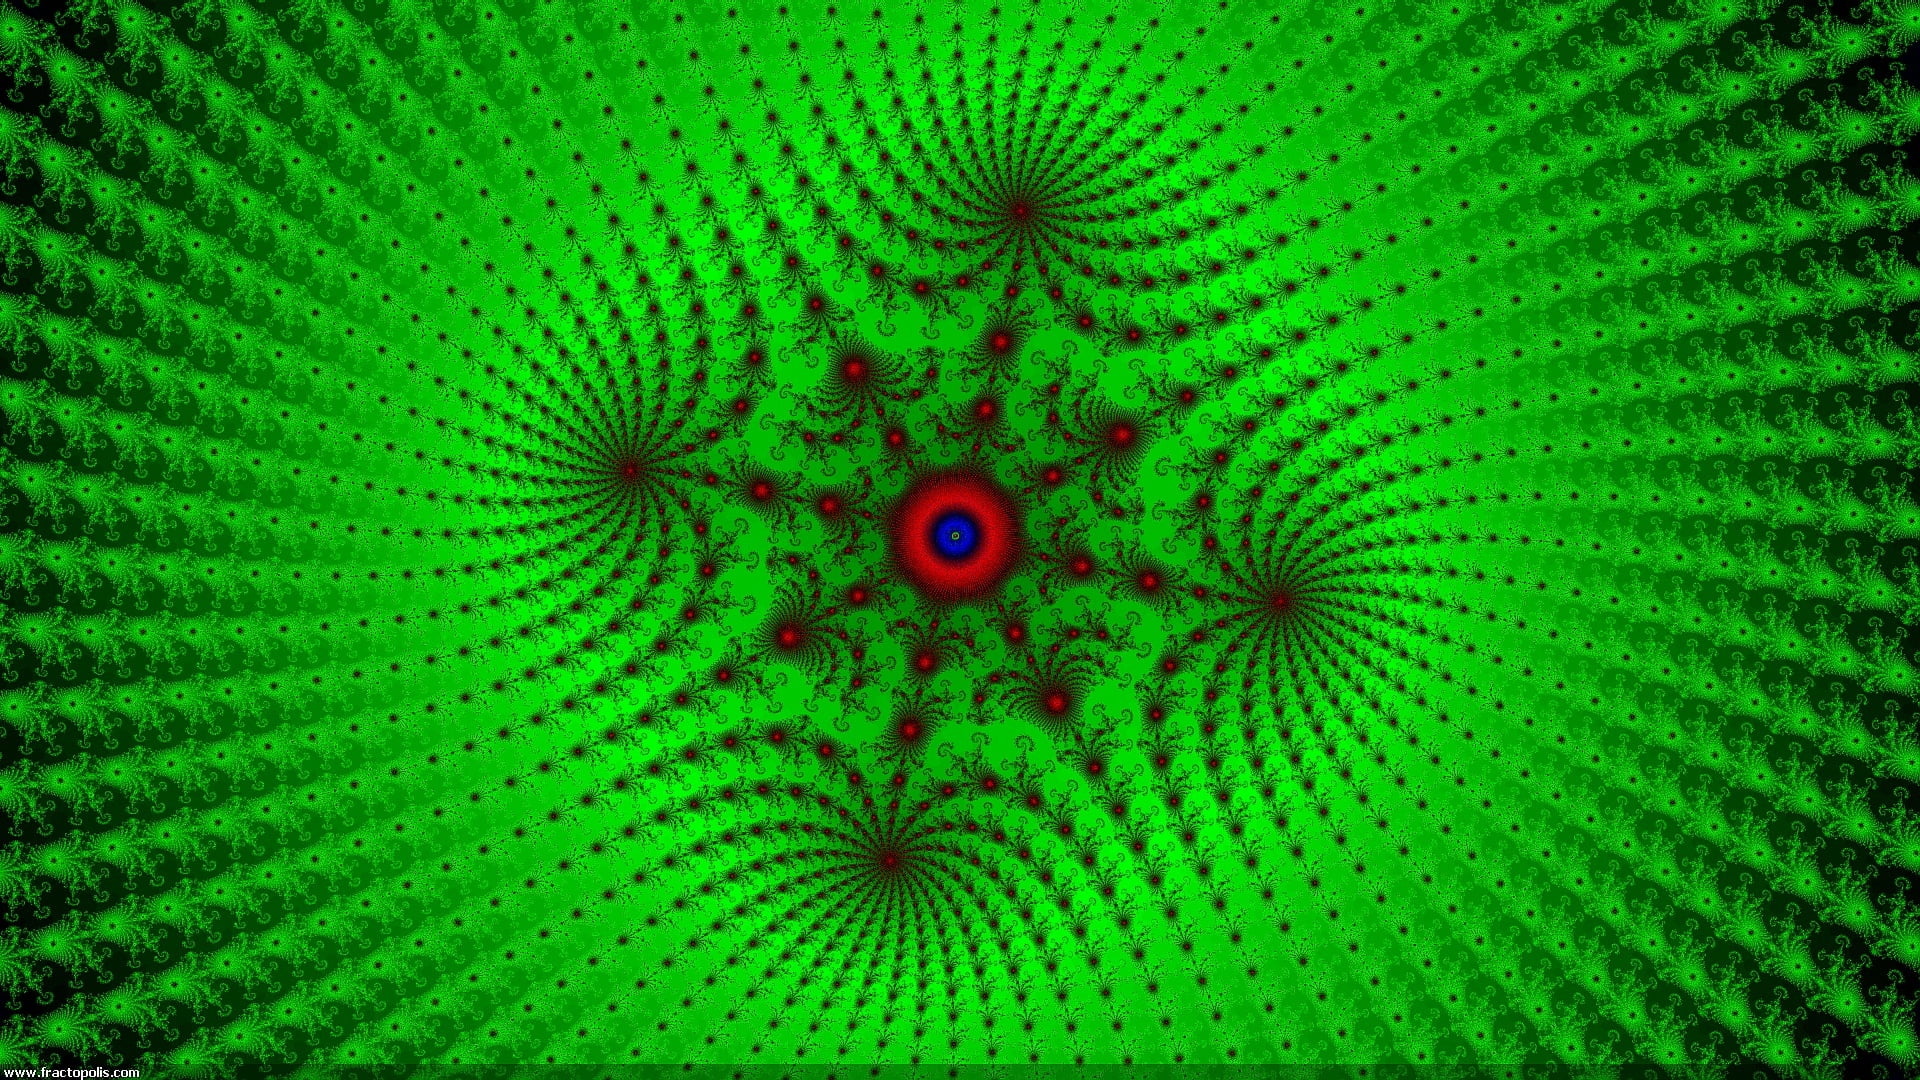 Optical illusion, Green and red, Striking visuals, 1920x1080 Full HD Desktop